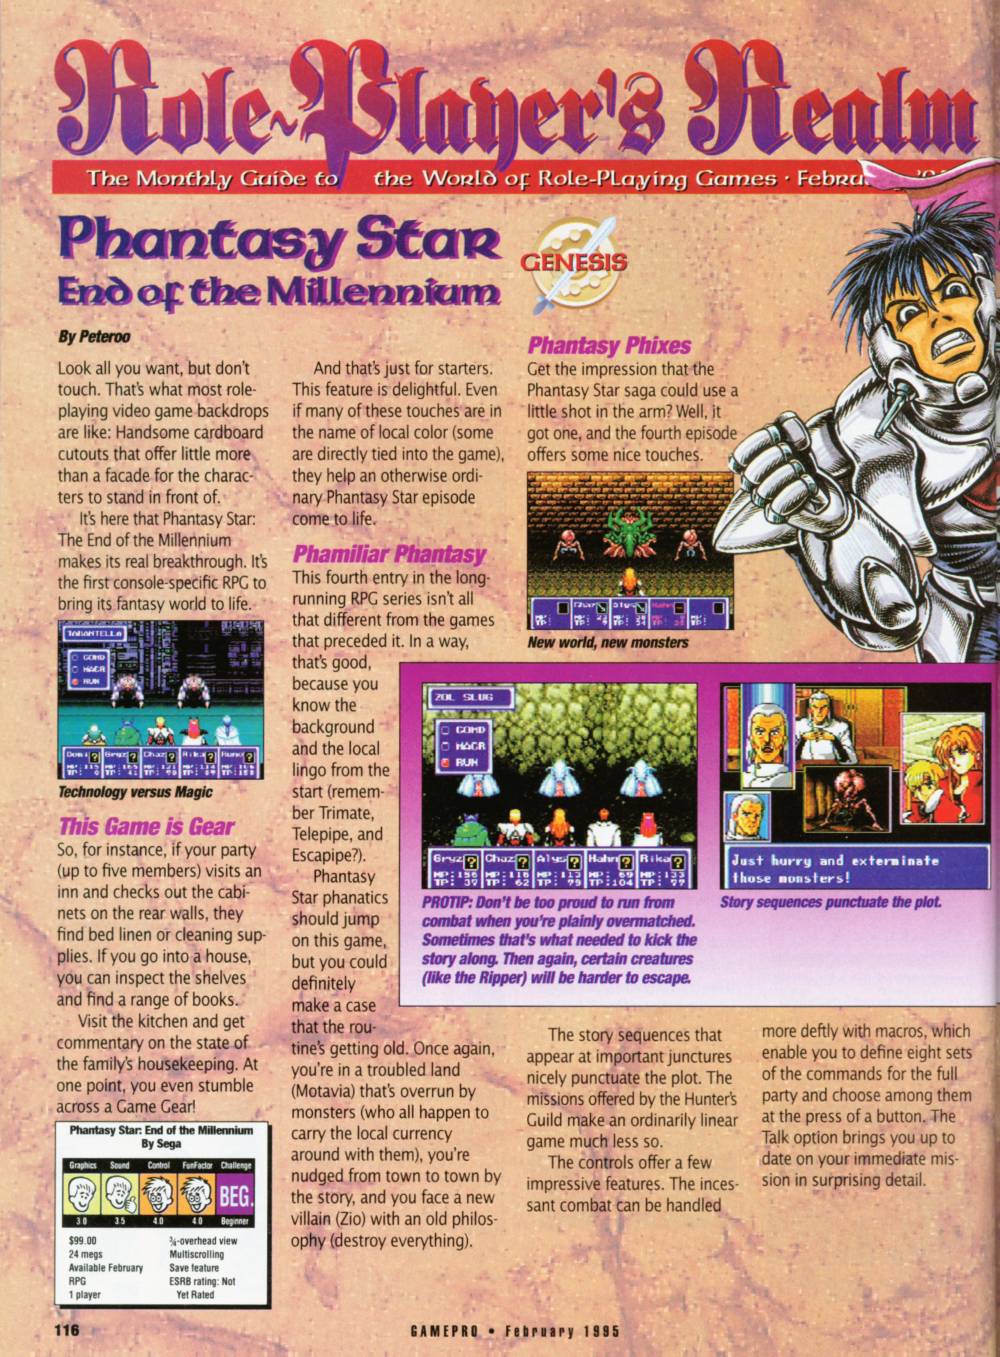 GamePro 67, Page 1